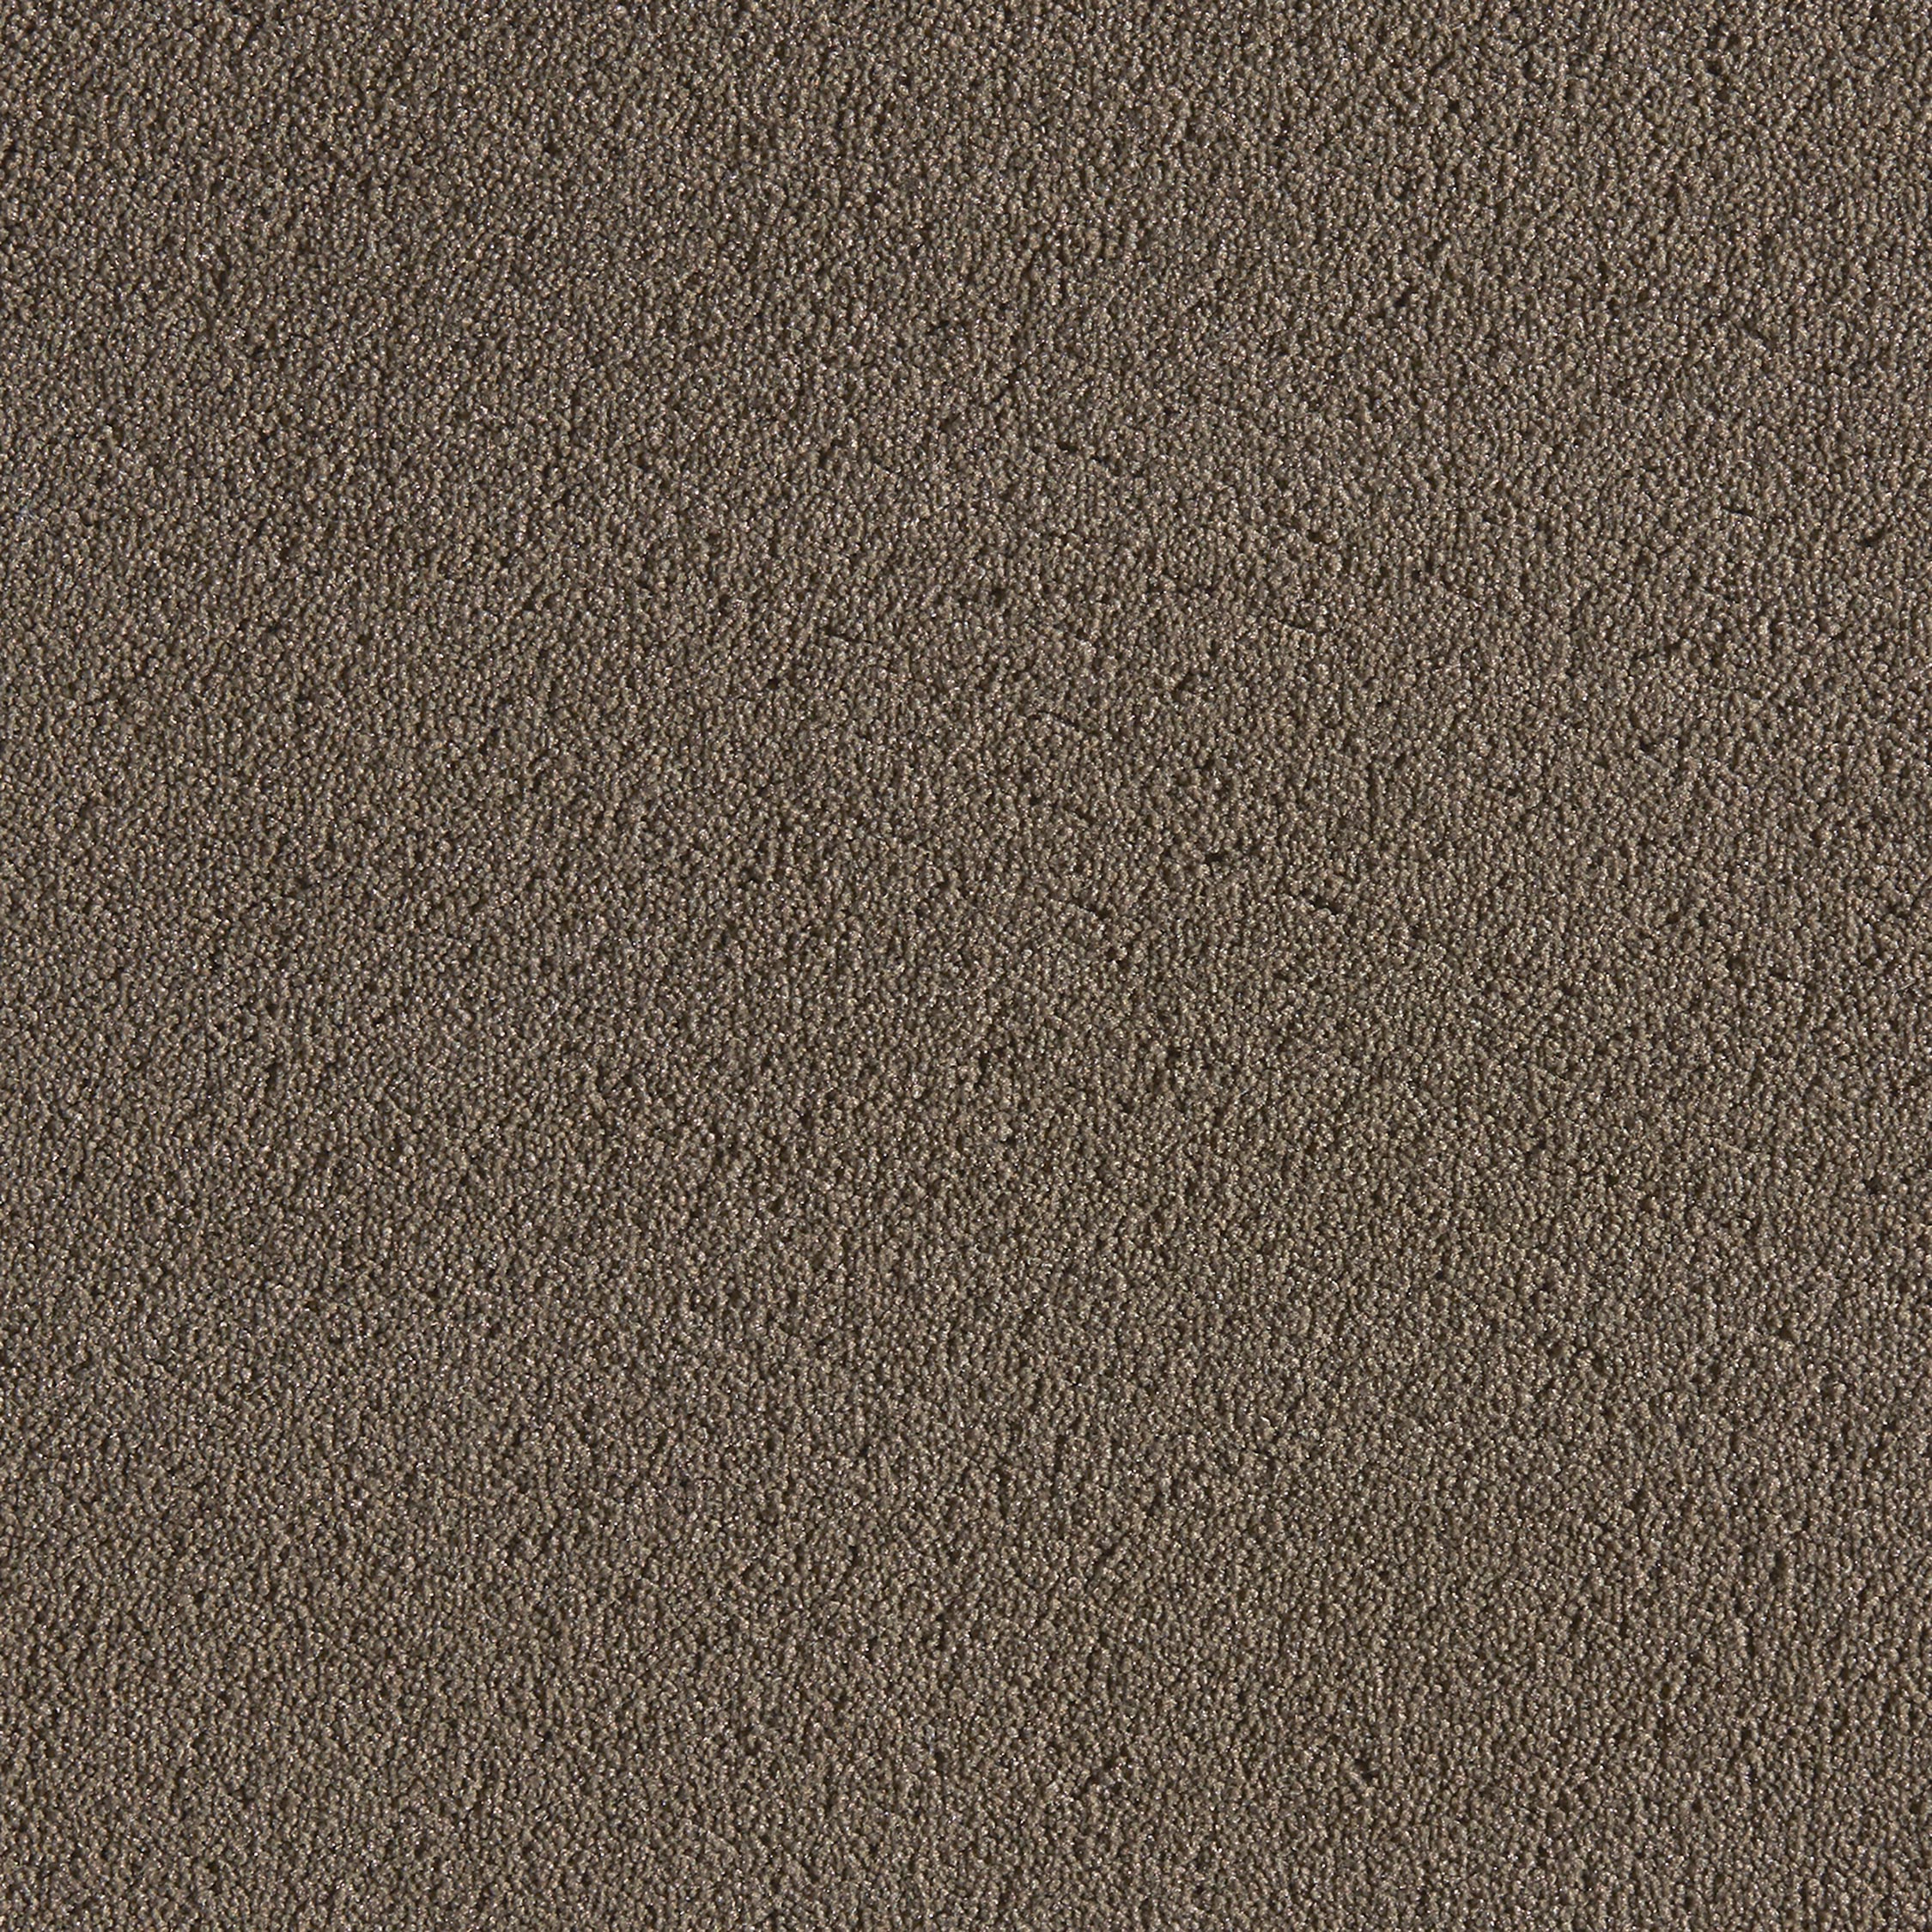 Texture 2000 taupe